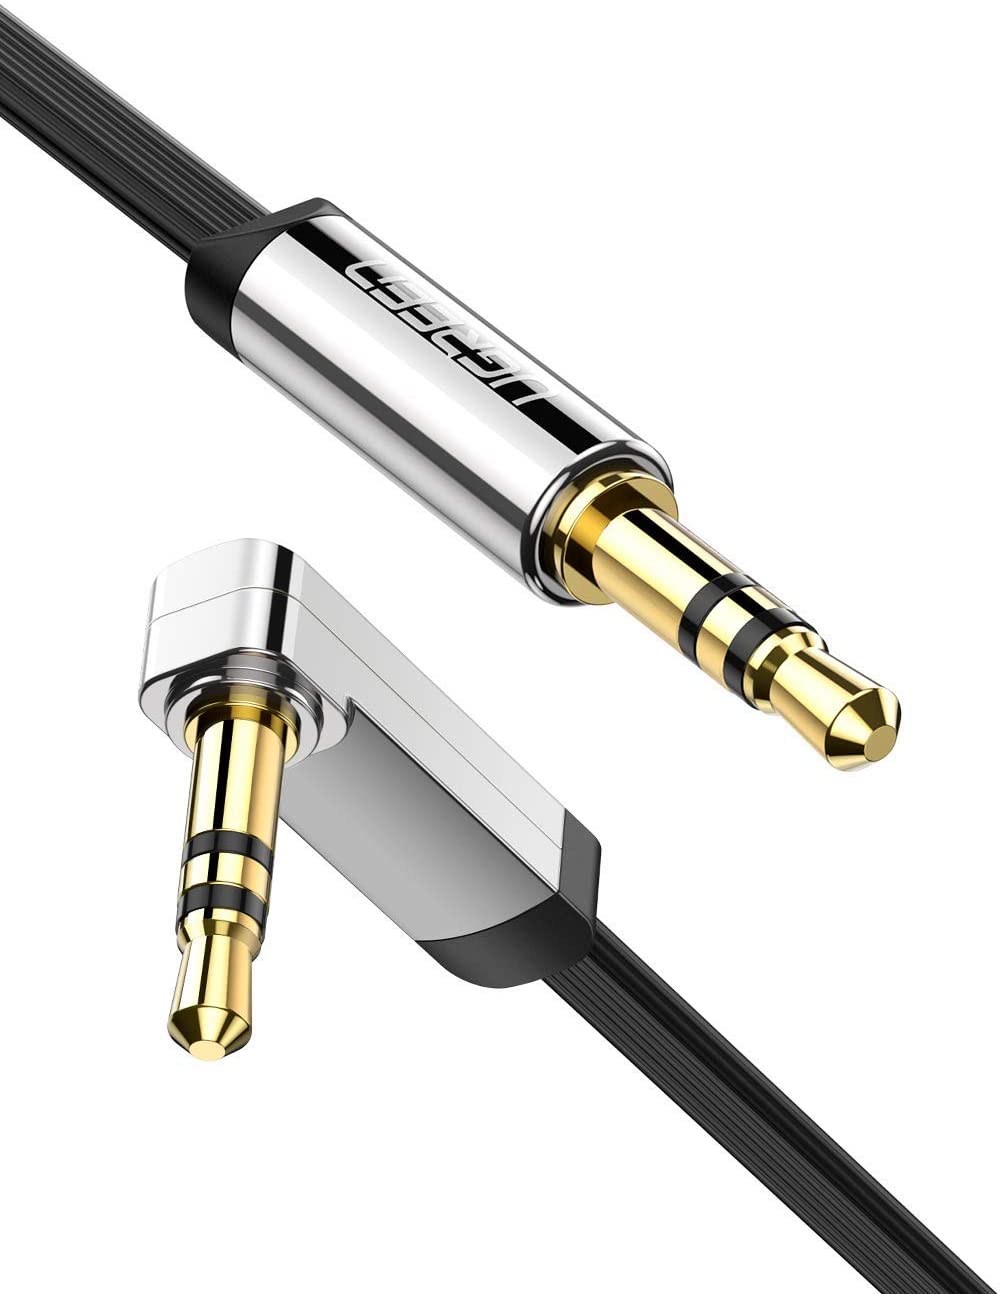 Home Stereo KabelDirekt Pro Series 1 foot 3.5mm Audio Aux Cord iPod 24k Gold-Plated Male to Male Auxiliary Cable for Car iPad or any Audio Device with 3.5mm Aux Port iPhone Smartphone 